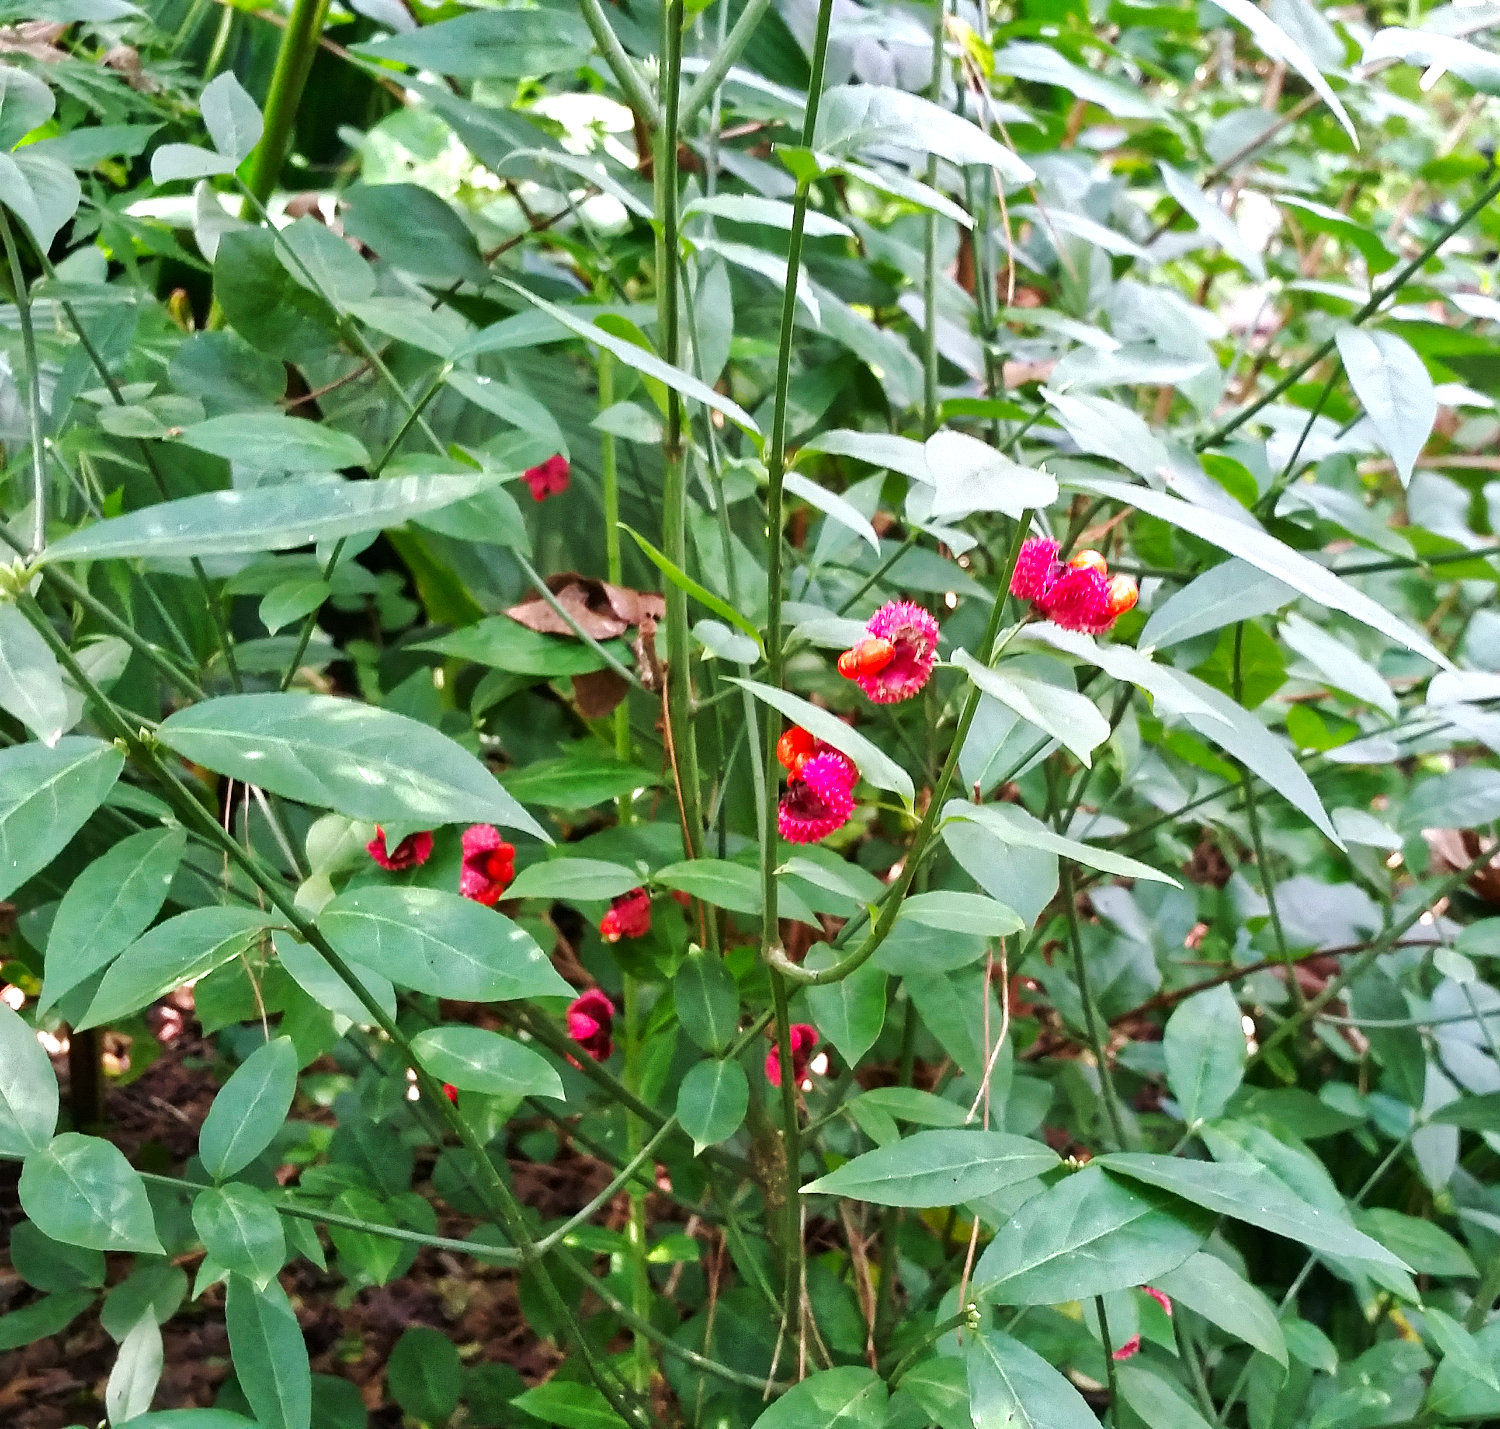 The seed pods on this native shrub earned its name ‘hearts-a-burstin’.”